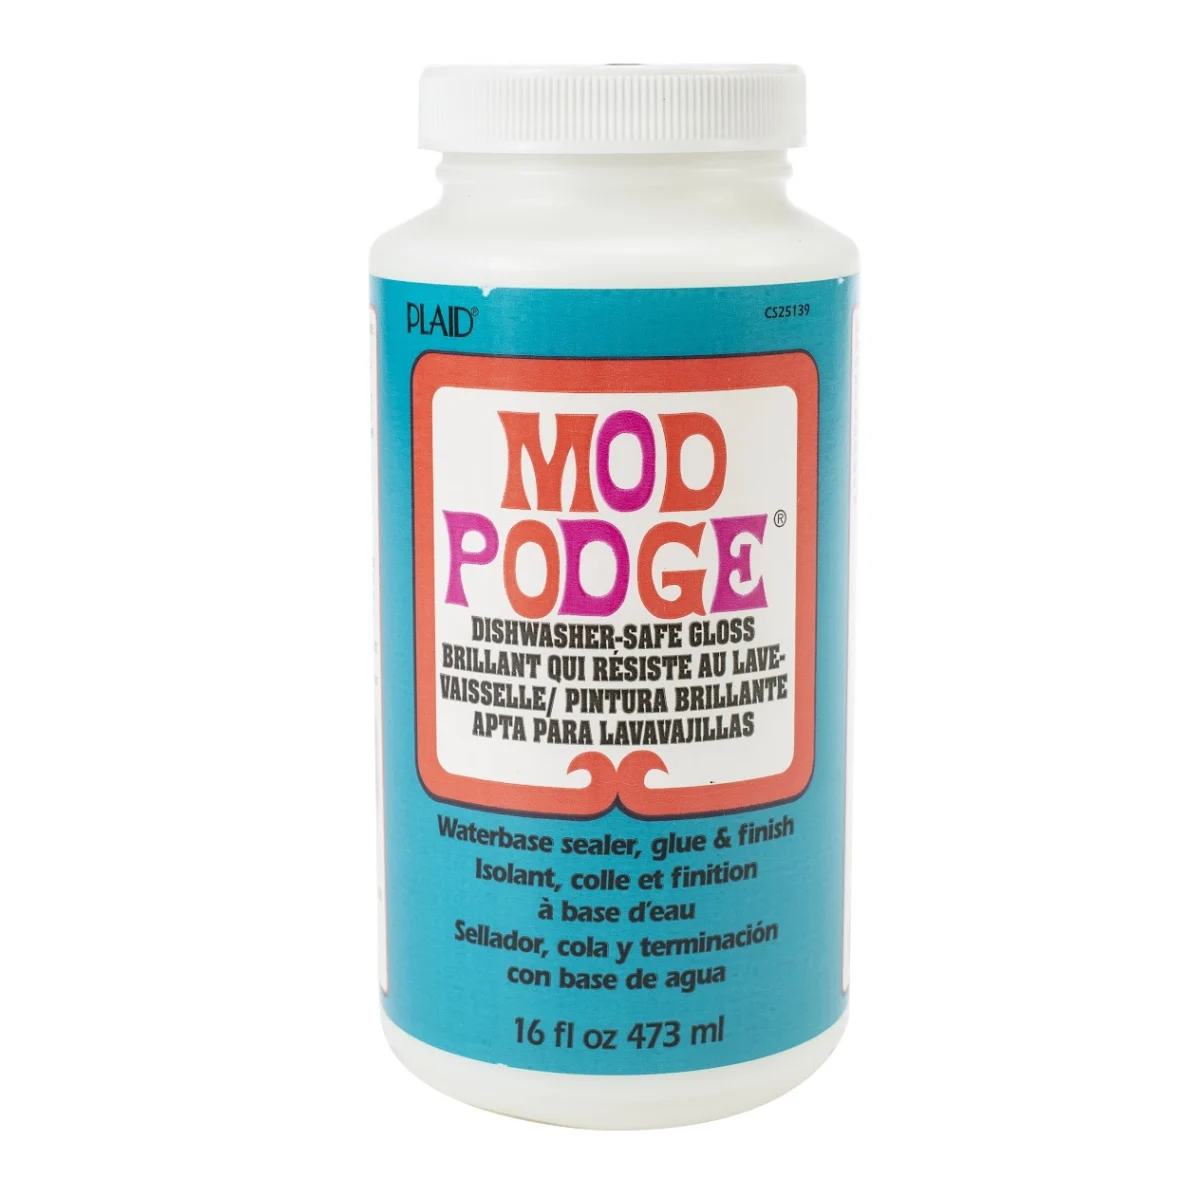 so I was searching for mod podge both of these are blue label lol